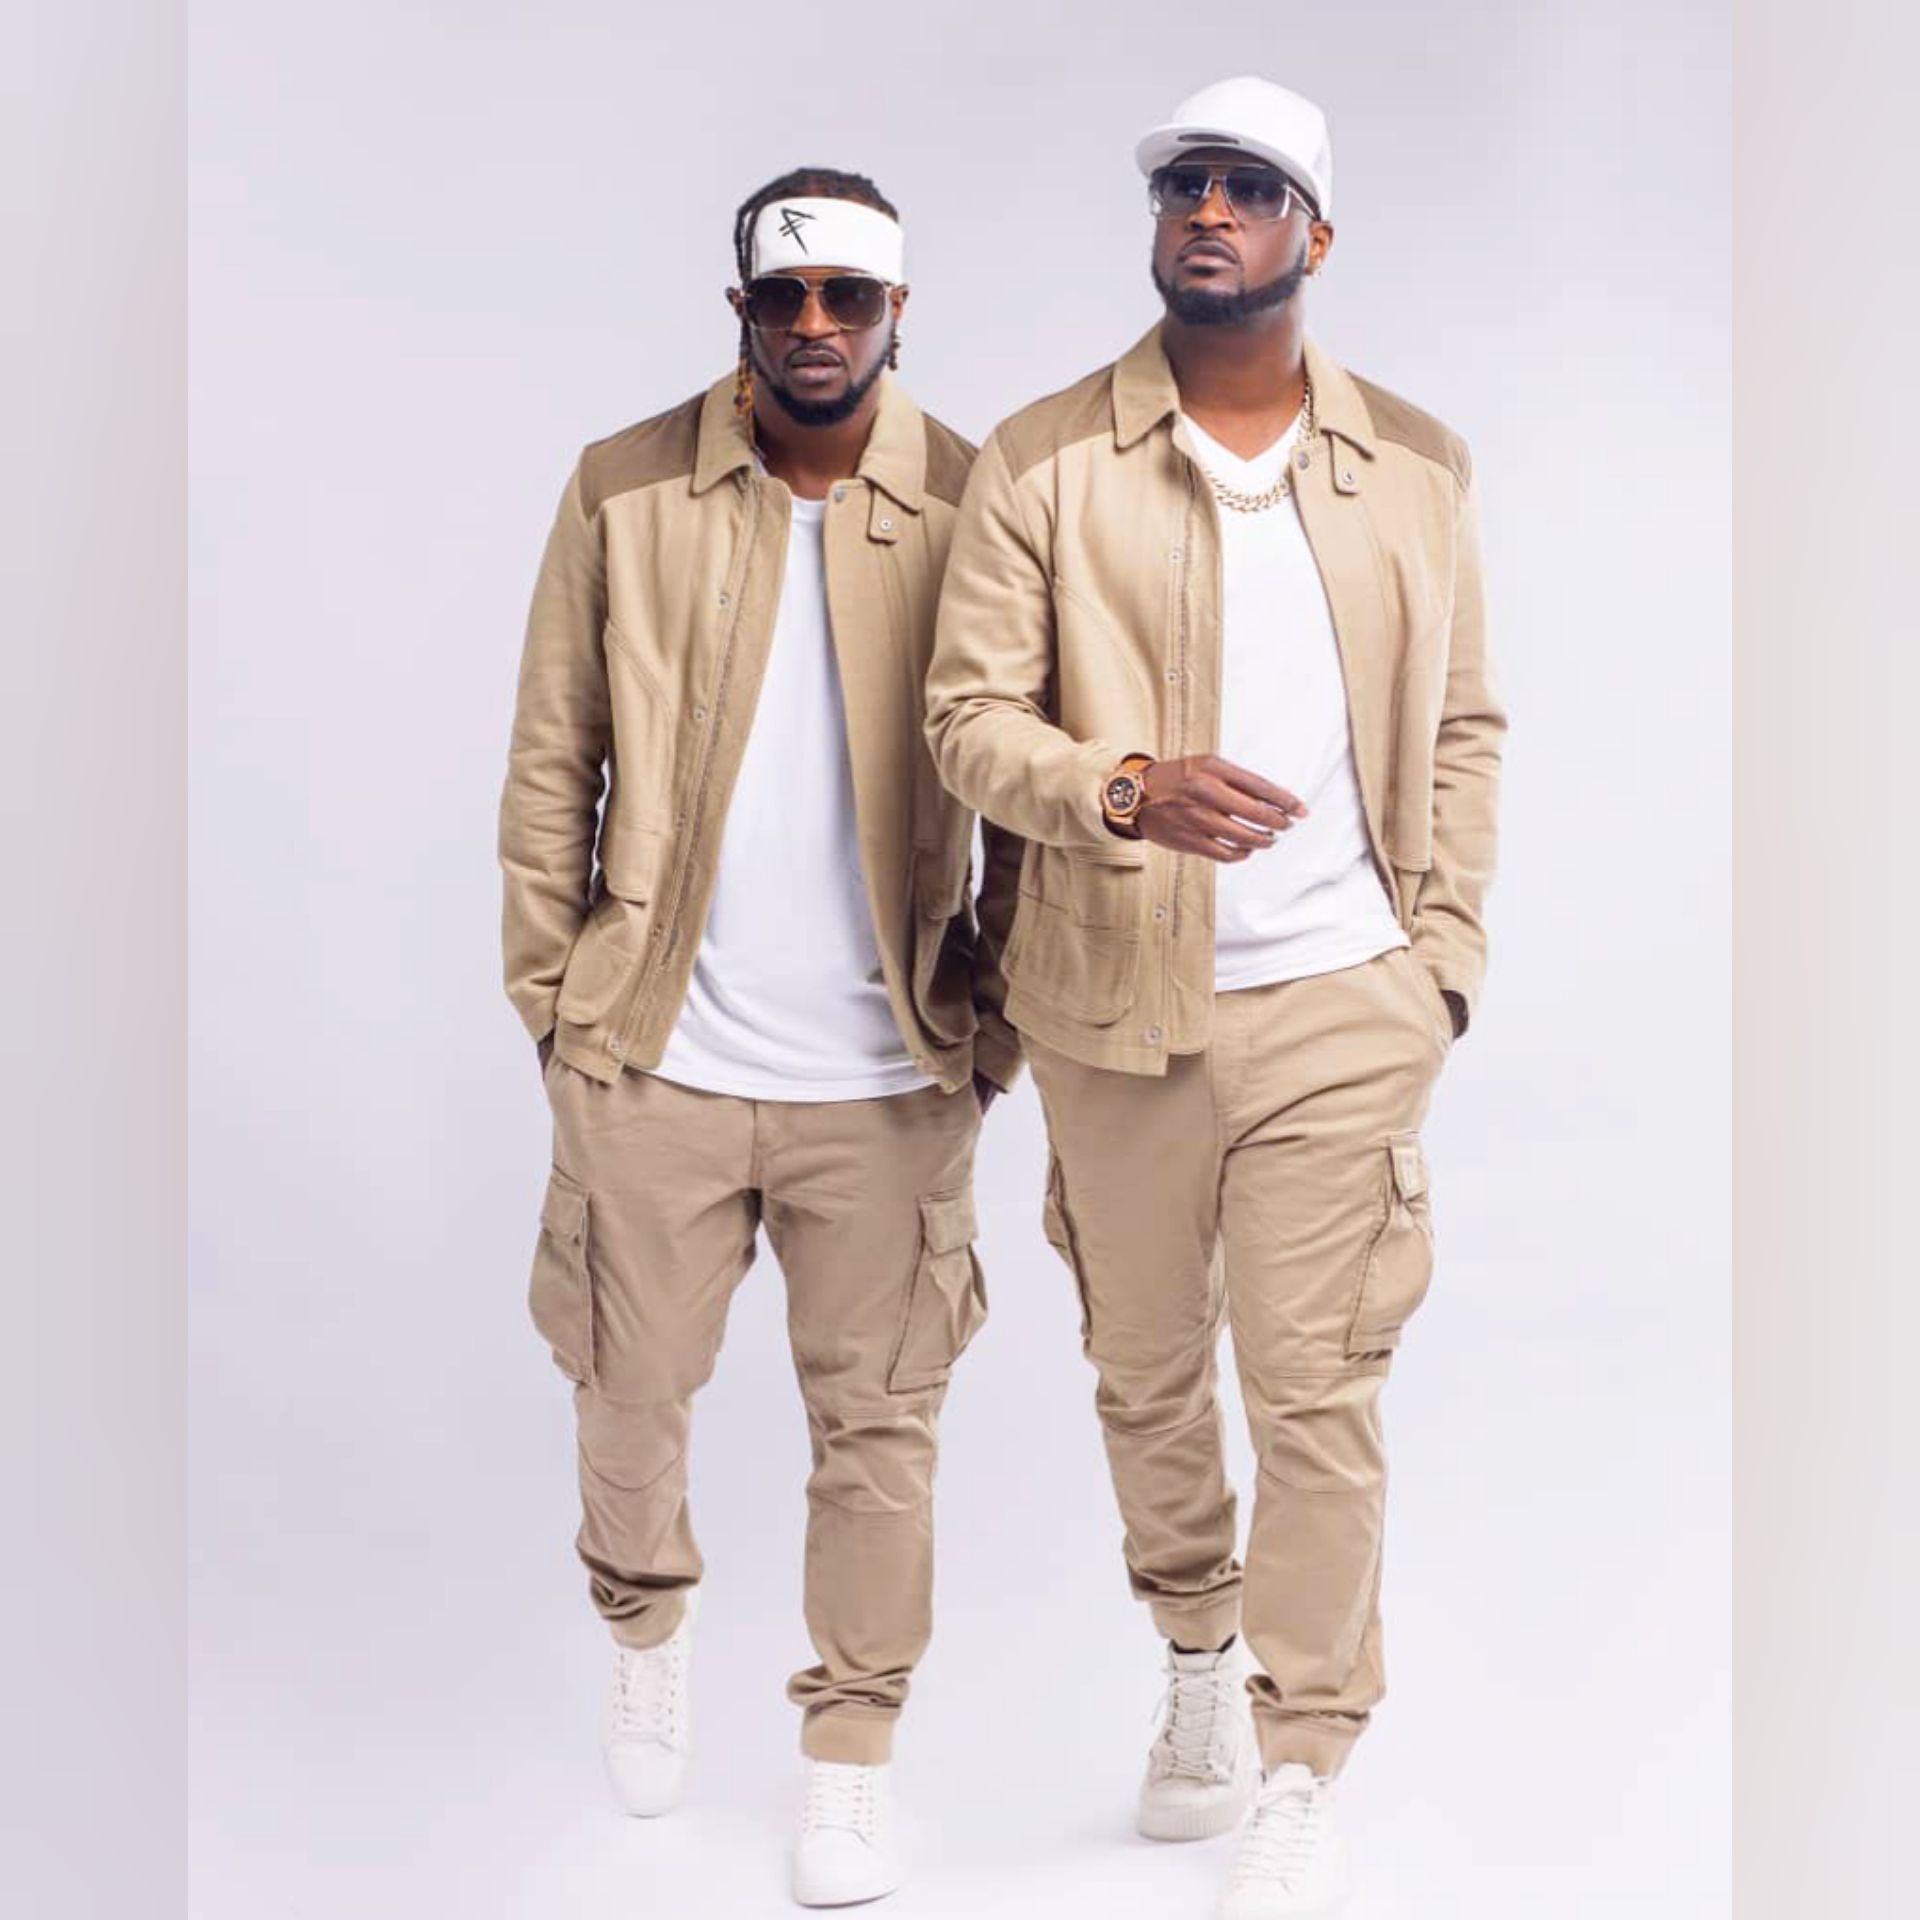 Our Fans Refused To Let Us Retire -Psquare